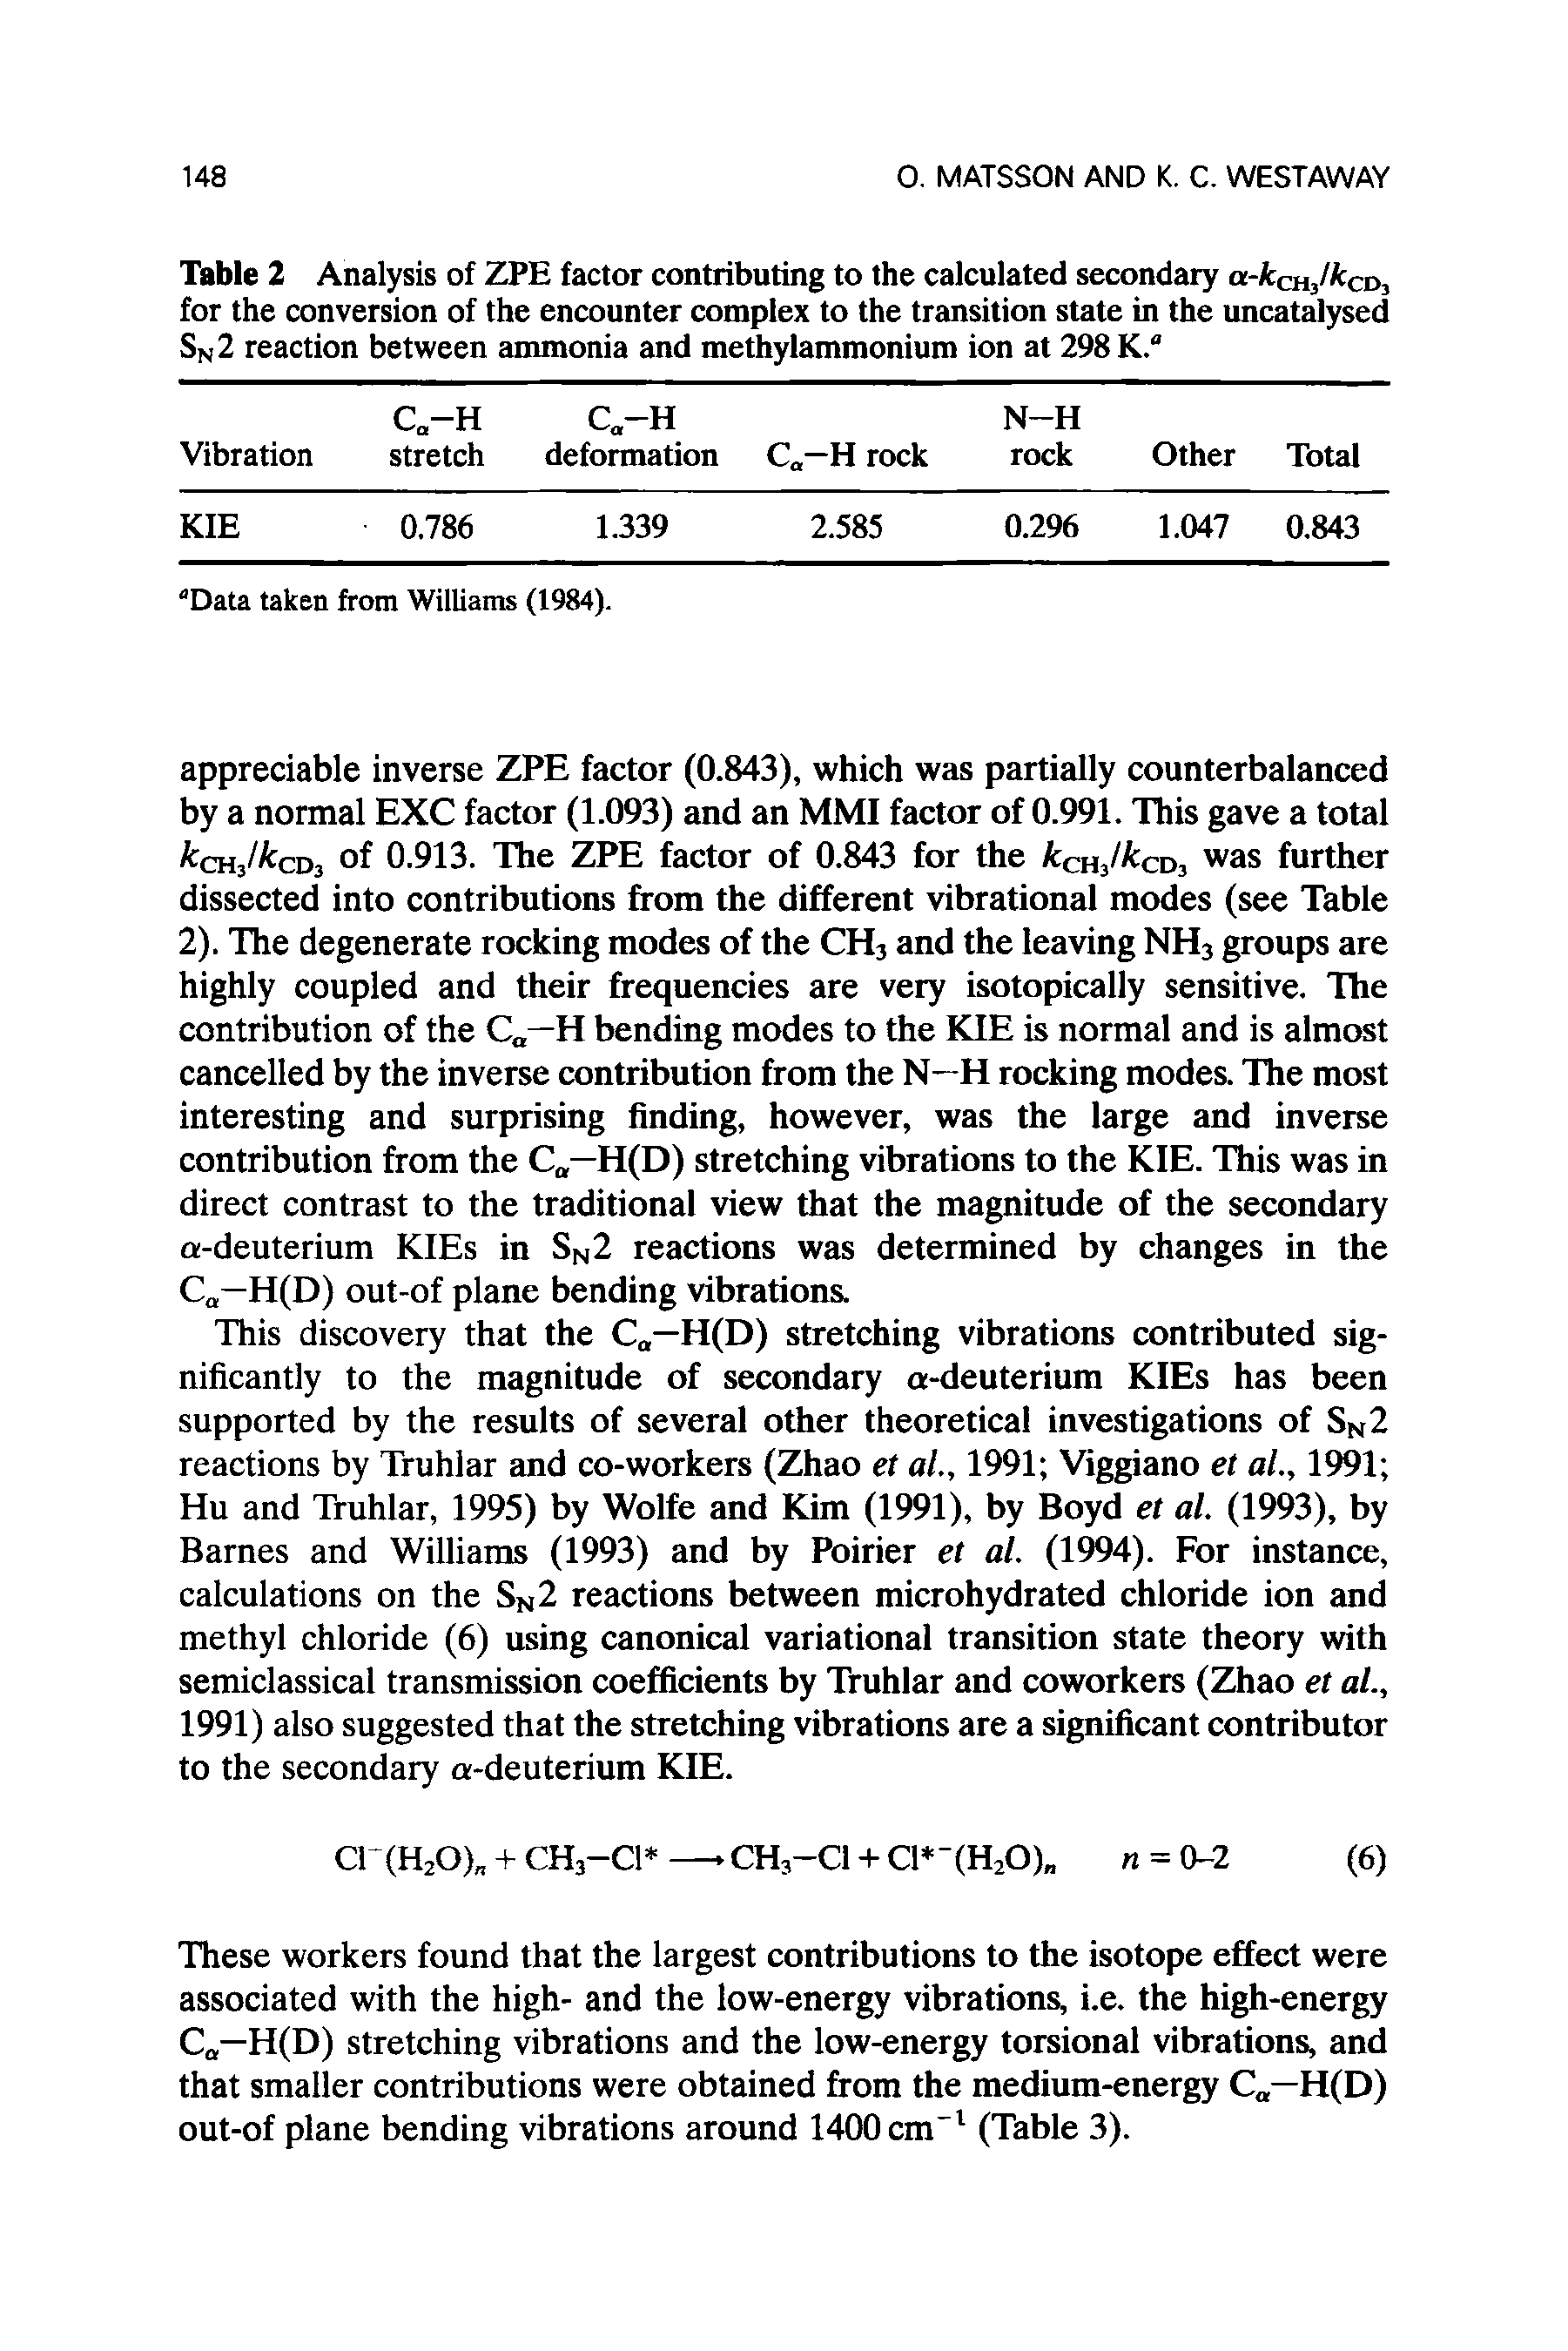 Table 2 Analysis of ZPE factor contributing to the calculated secondary a-kCHllkCD, for the conversion of the encounter complex to the transition state in the uncatalysed Sn2 reaction between ammonia and methylammonium ion at 298 K.°...